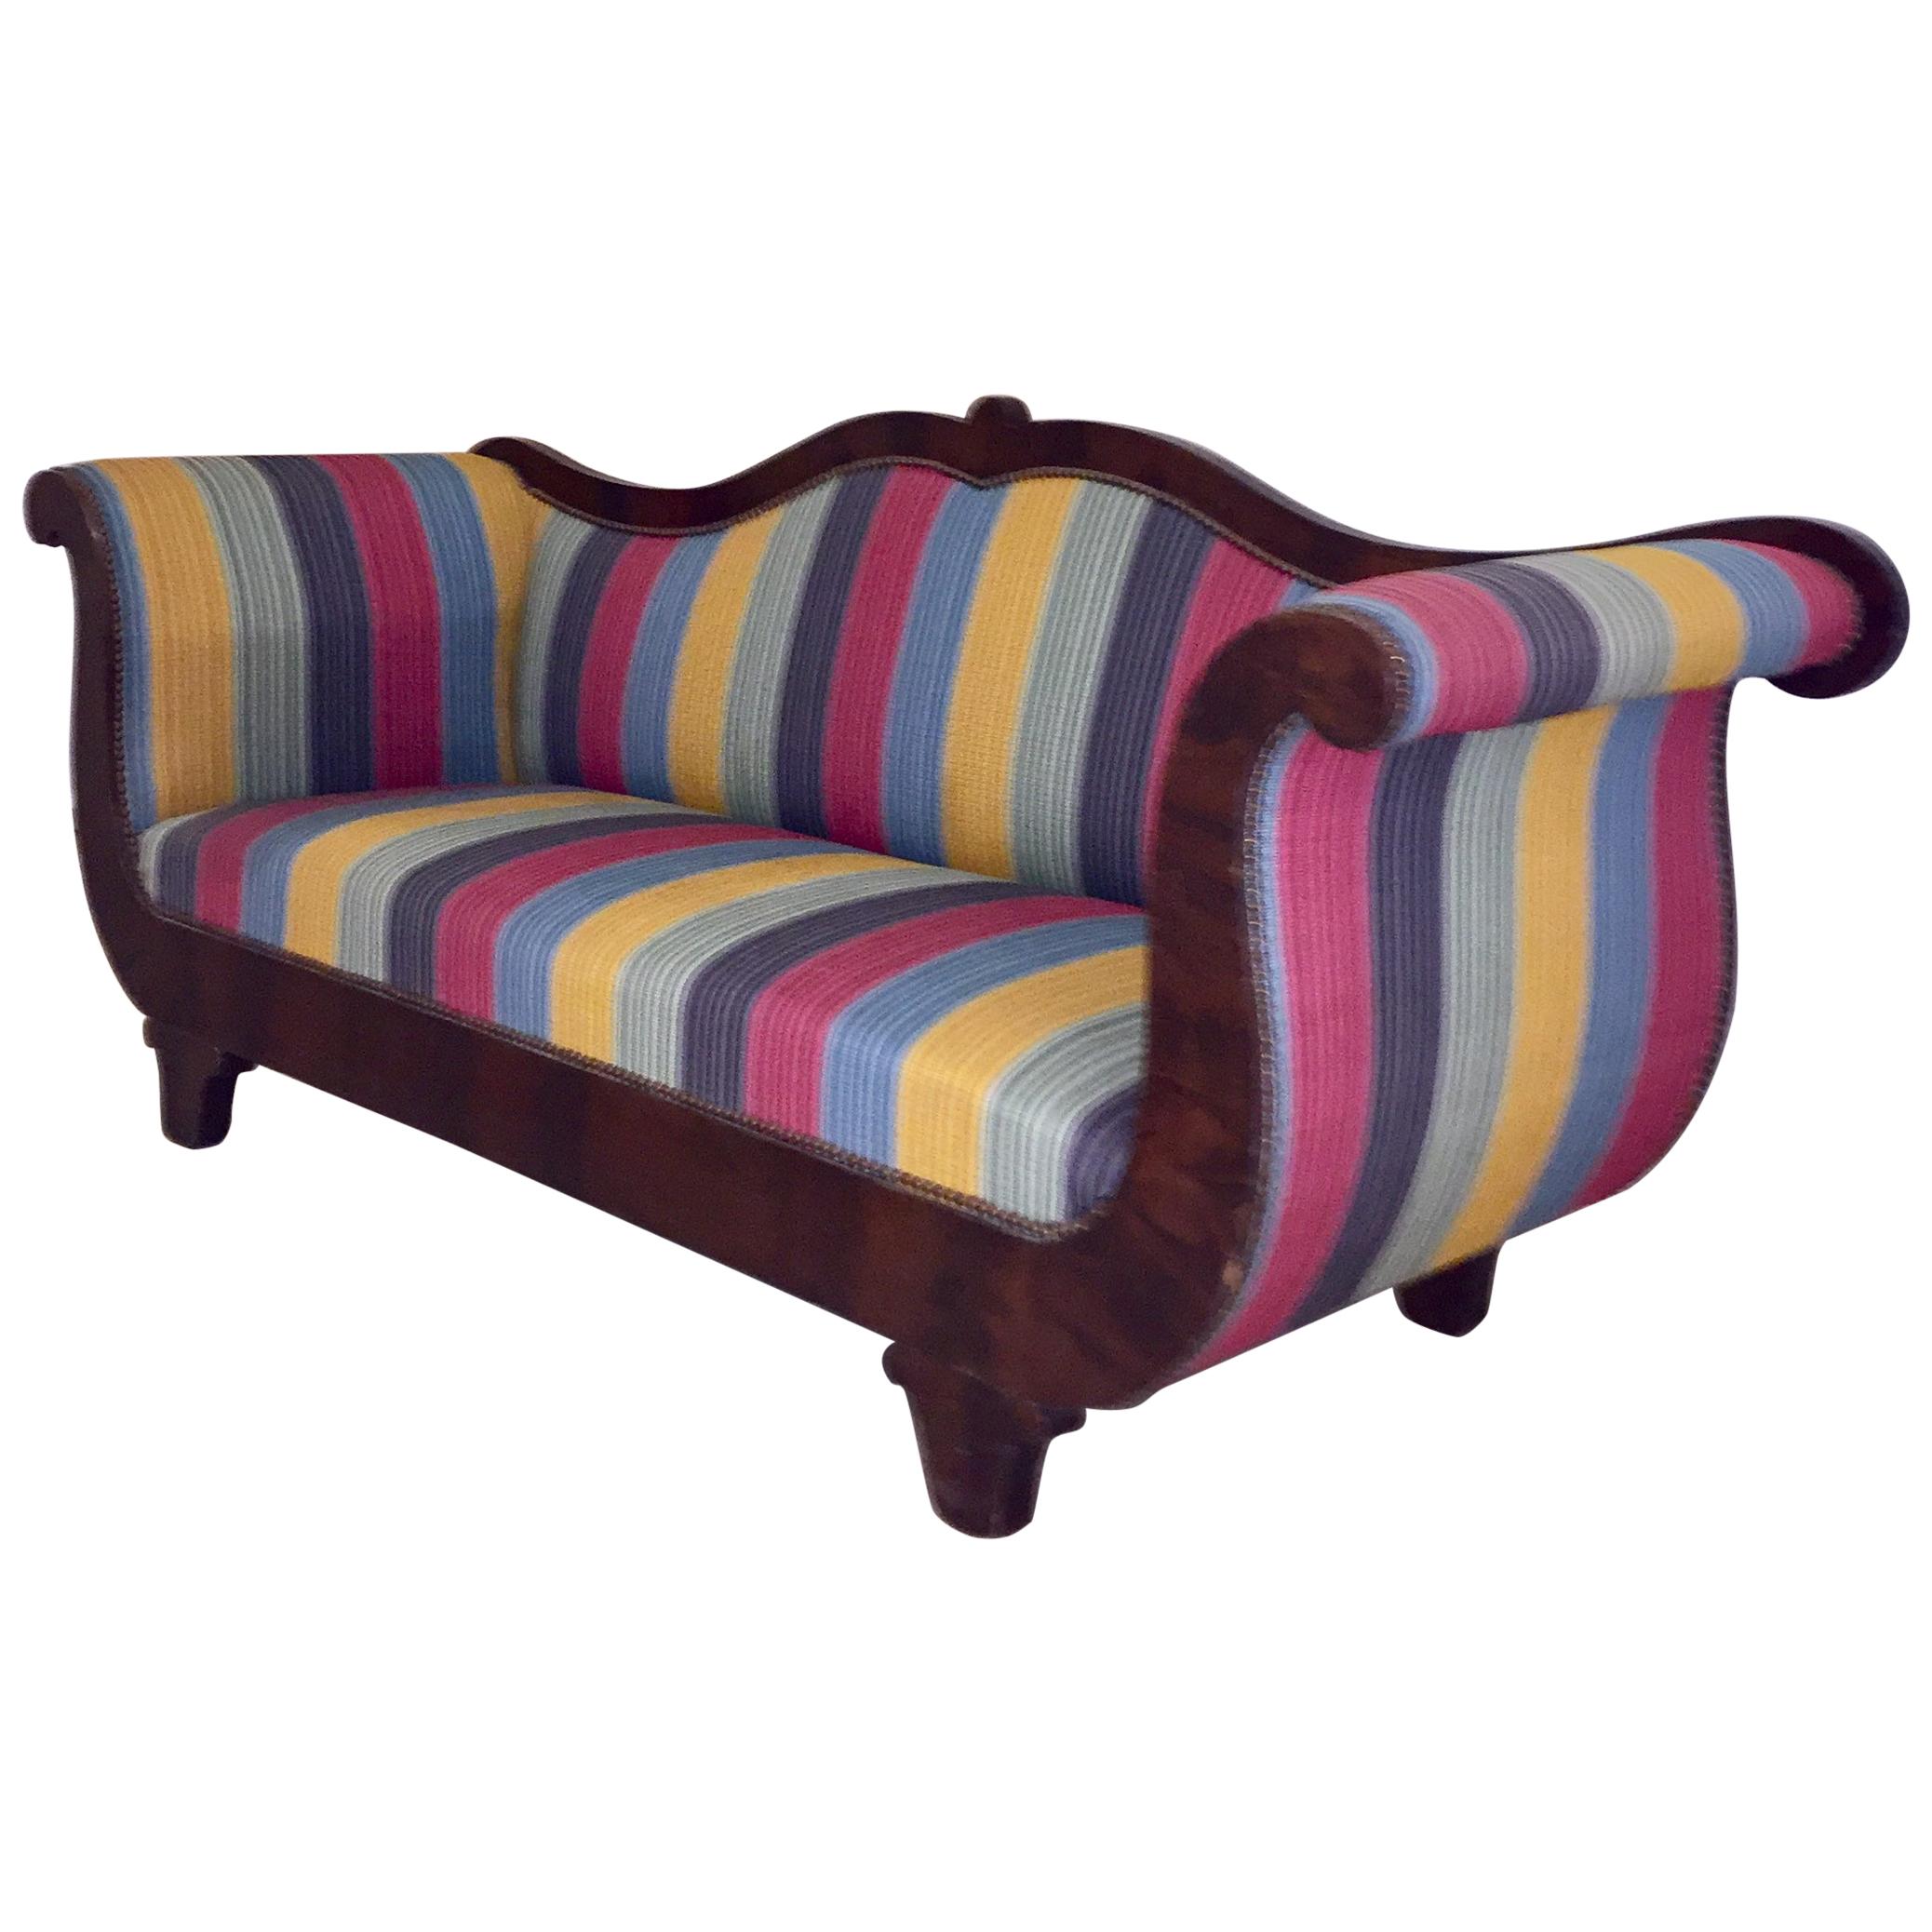 French Louis Phill Bench, Day Bed in Mahogan Yellow Blue Red Soft Stipes Fabric